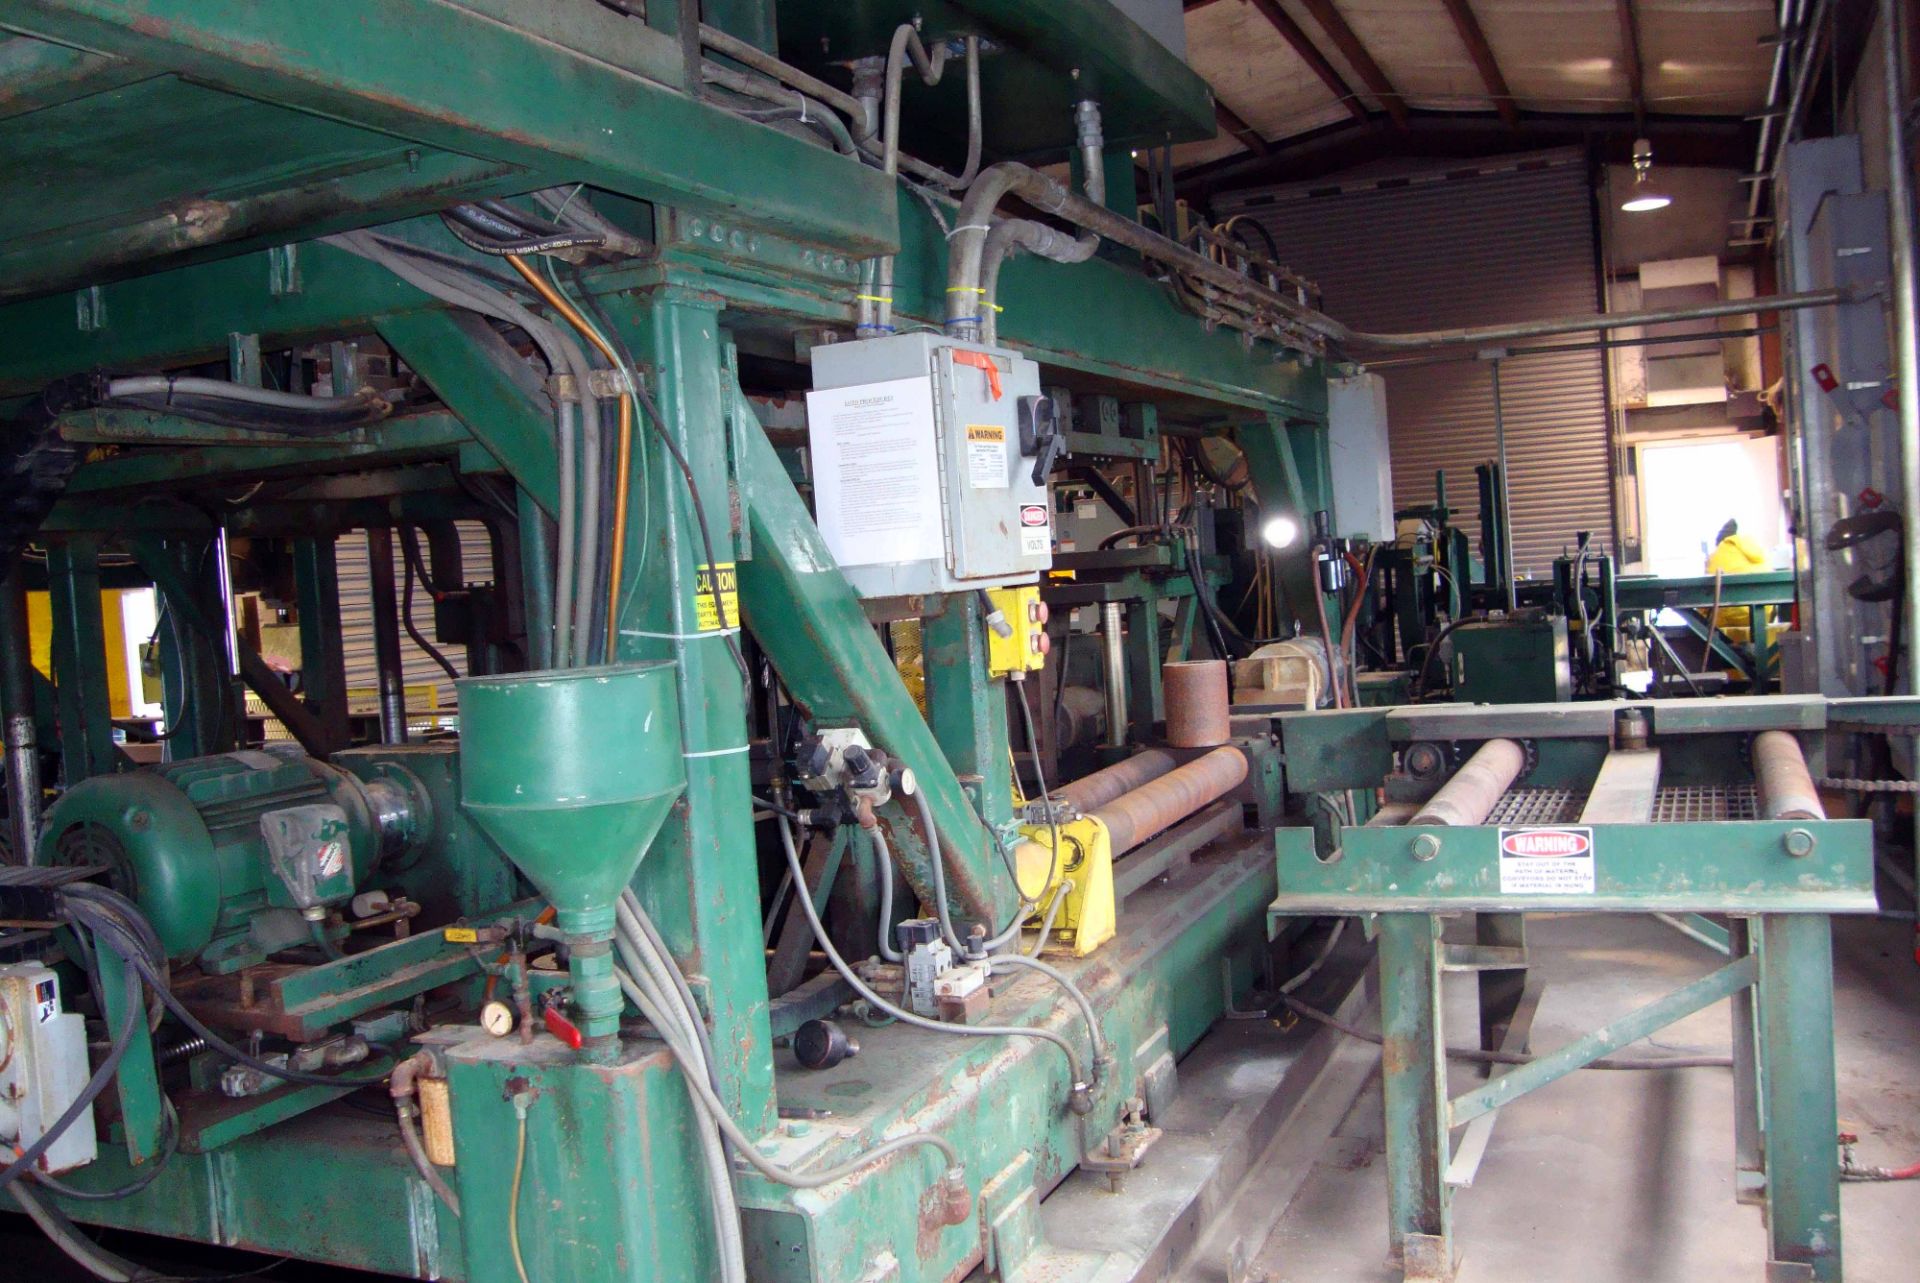 CNC DRILL LINE, CONTROLLED AUTOMATION MDL. DRL-344 - 3-SPINDLE, new 2005, PC based CNC control,